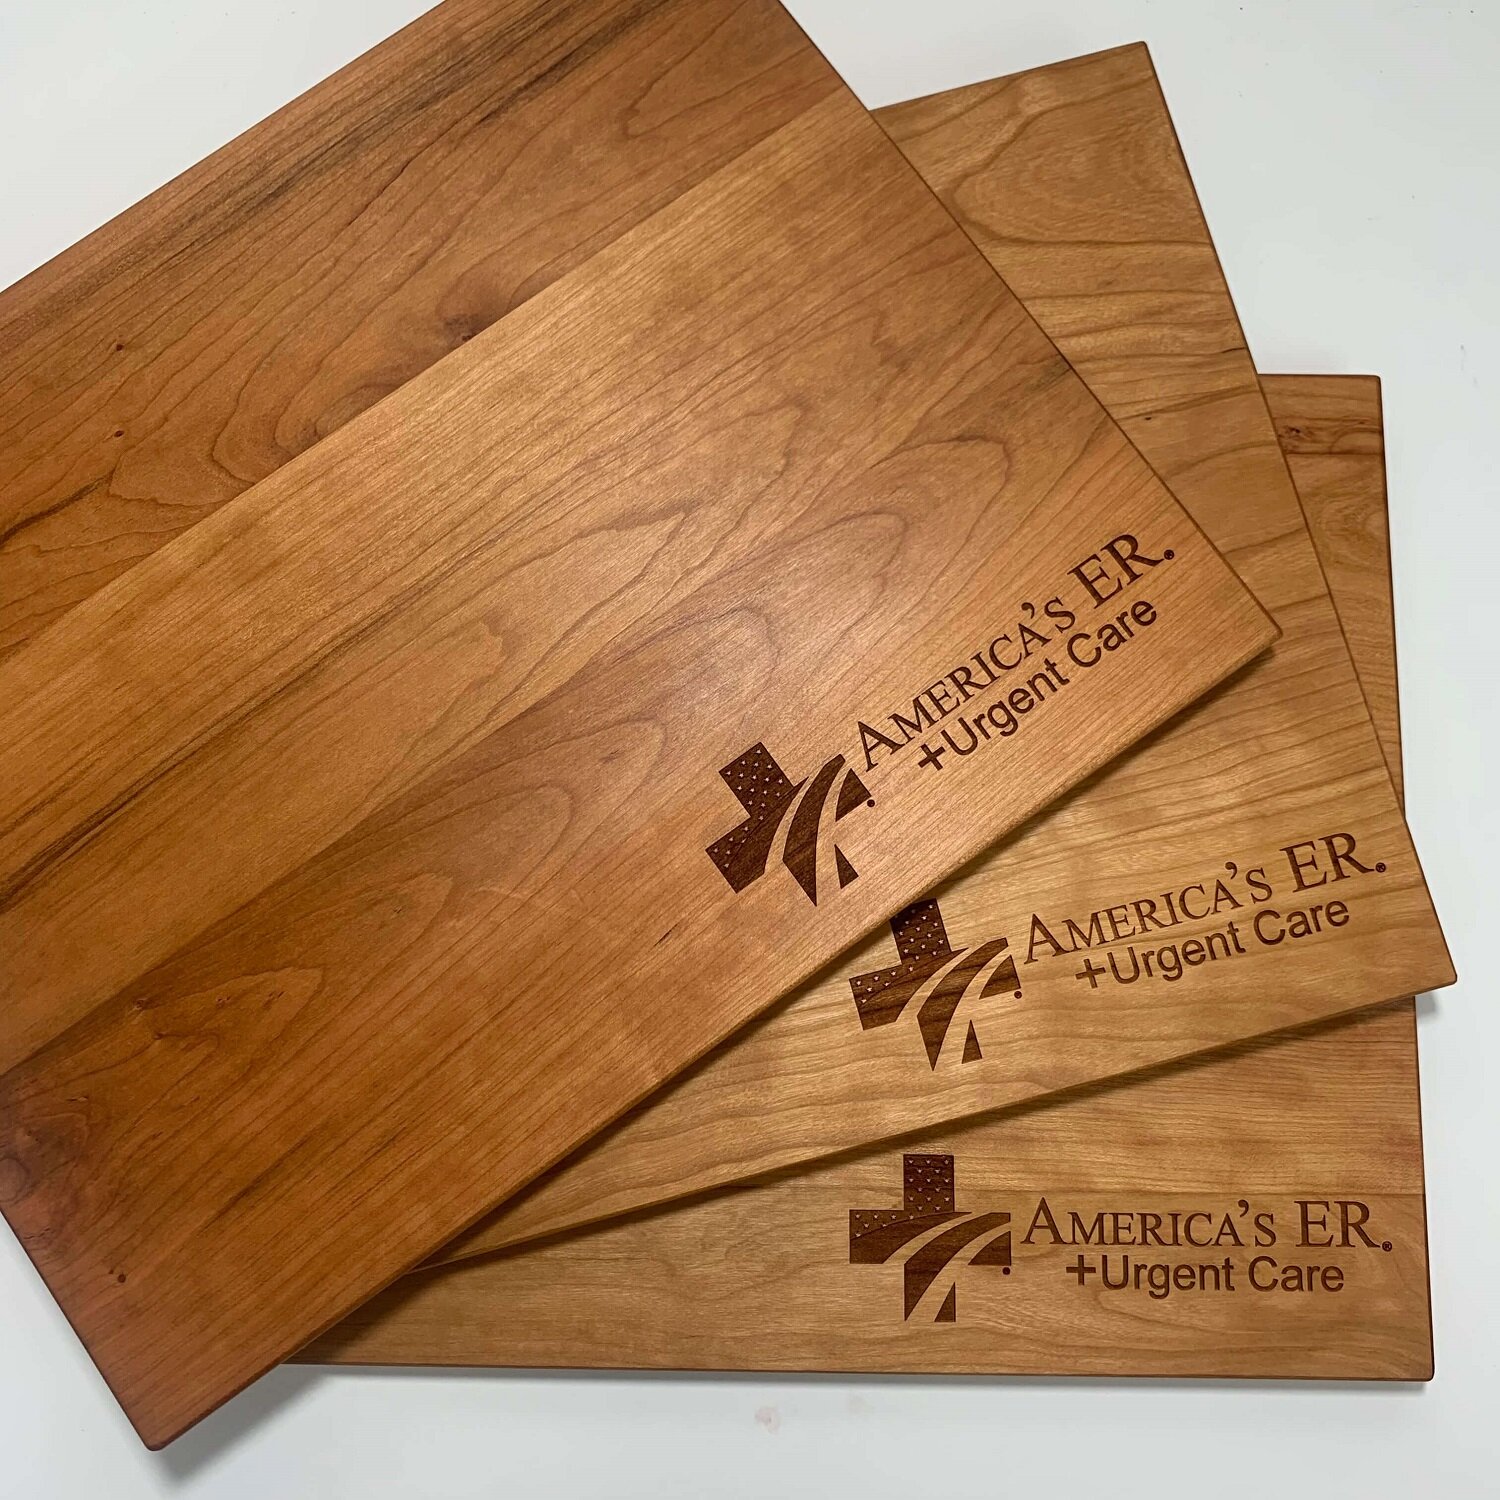 Branded Award - Custom Award - Wood Engraving - Corporate Identity Project - Branding Projects from Engrave It Houston